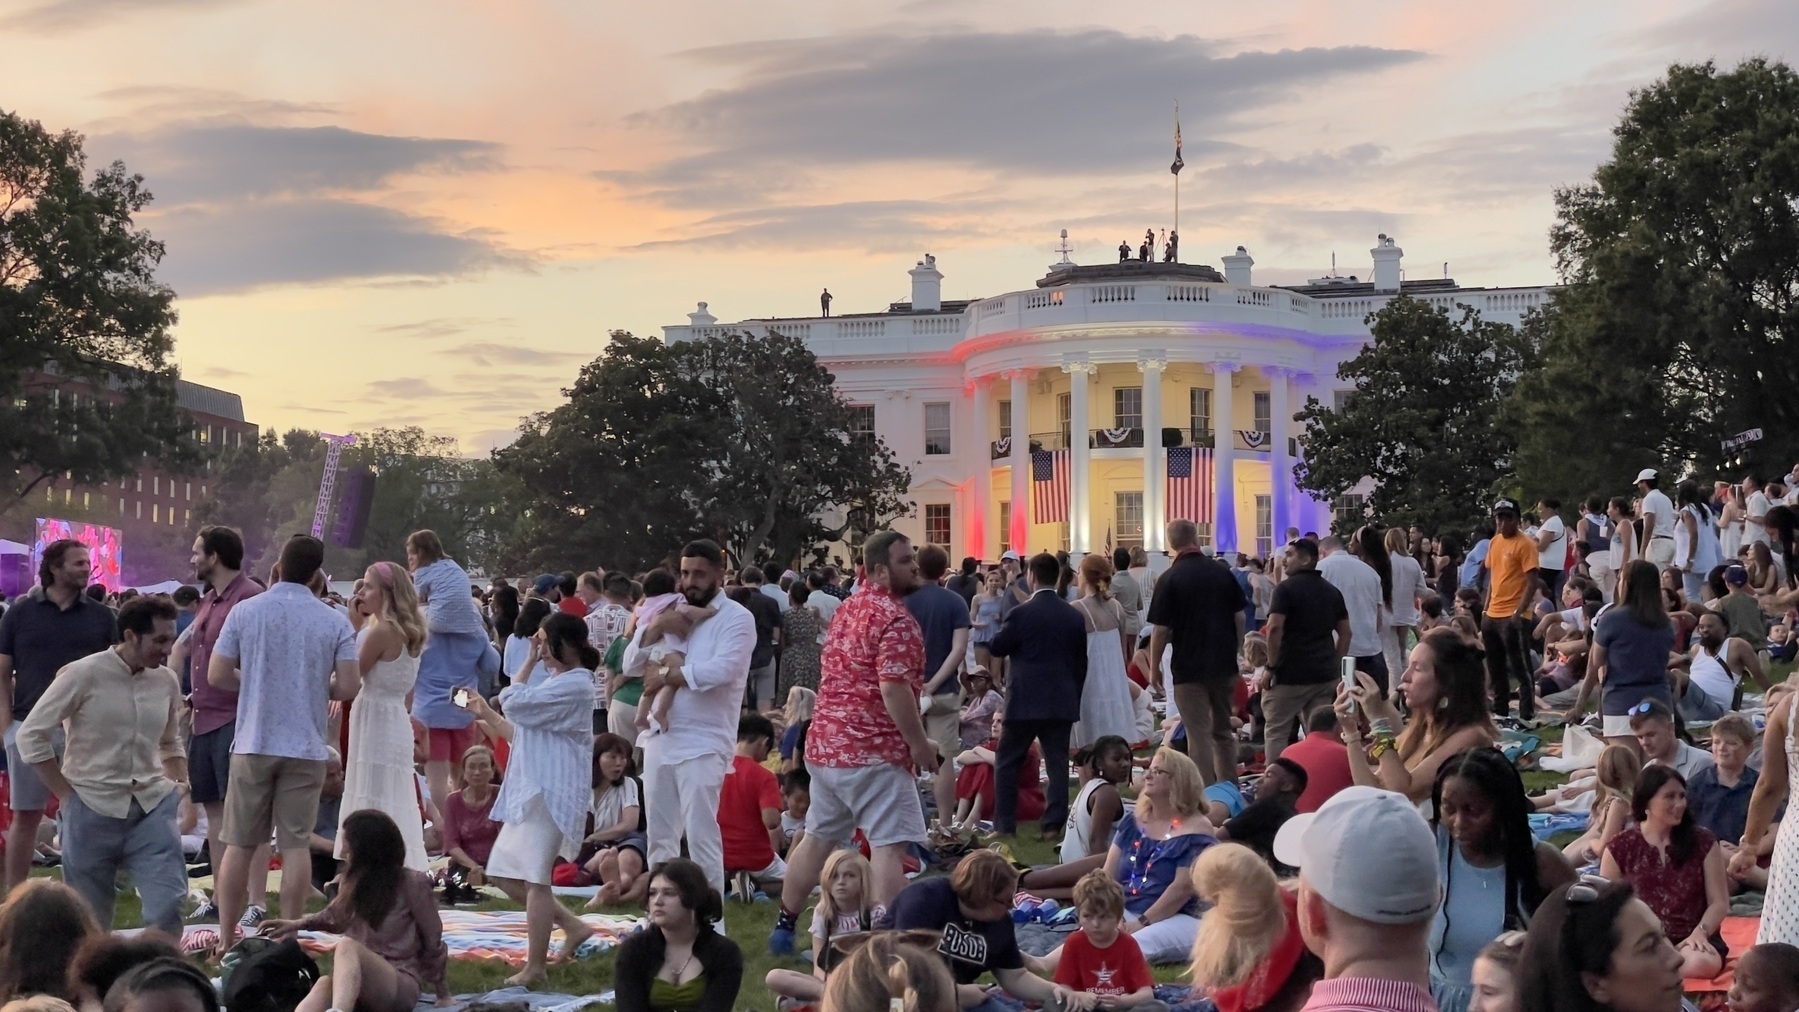 The White House from the South Lawn with Independence Day guests.